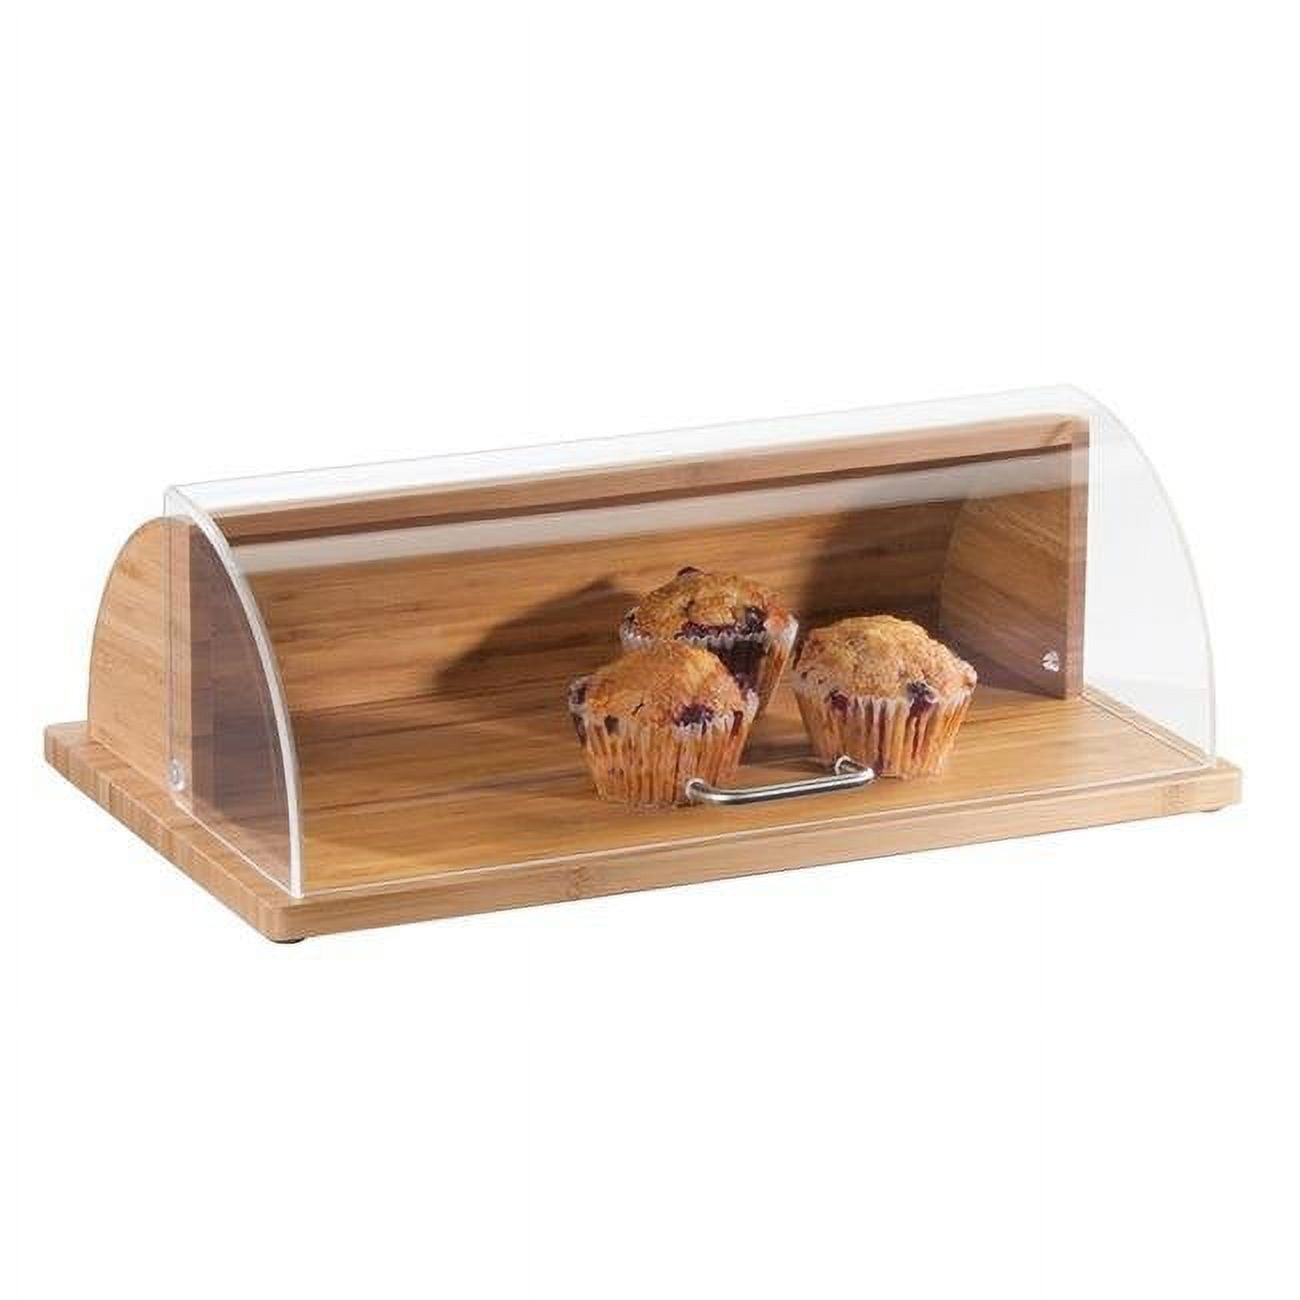 Cal Mil 1333-60 Bamboo Roll Top Tray - 20 x 11.5 x 6.5 in.